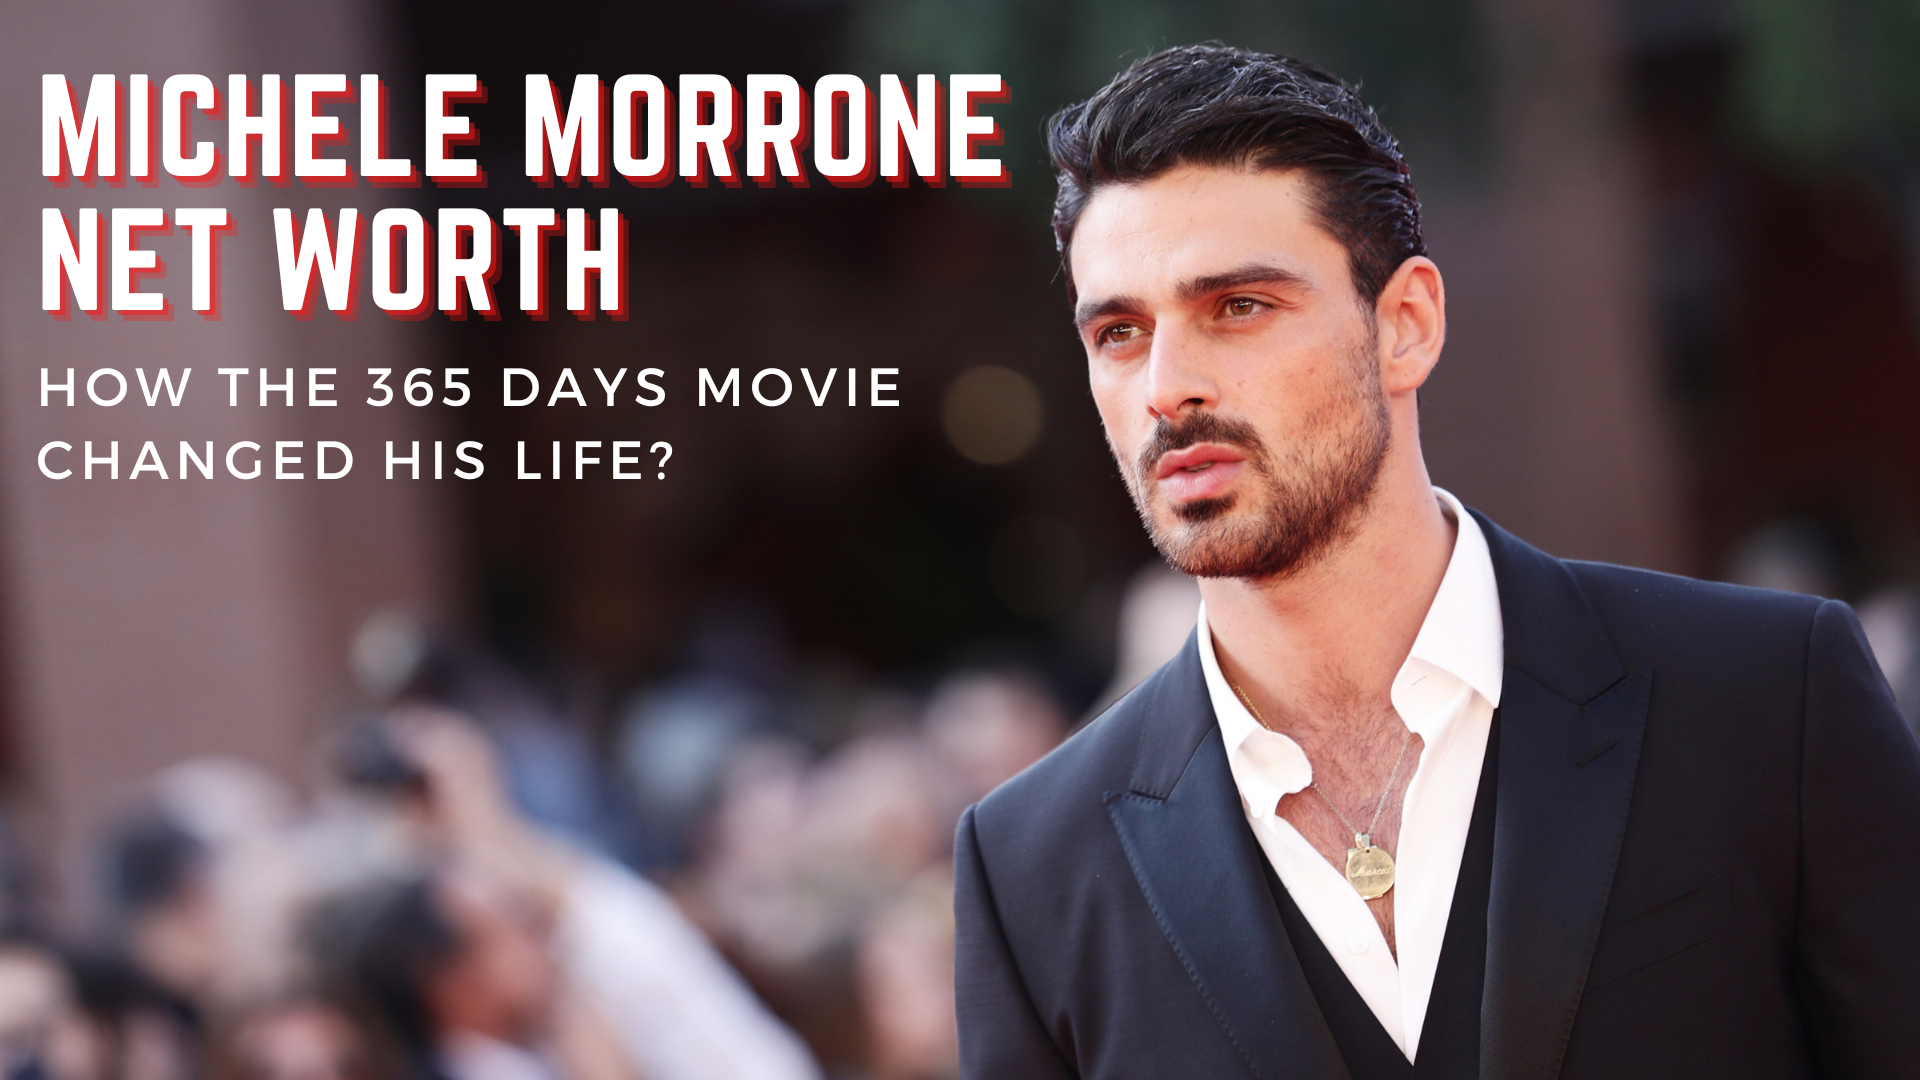 Michele Morrone Net Worth - How The 365 Days Movie Changed His Life?